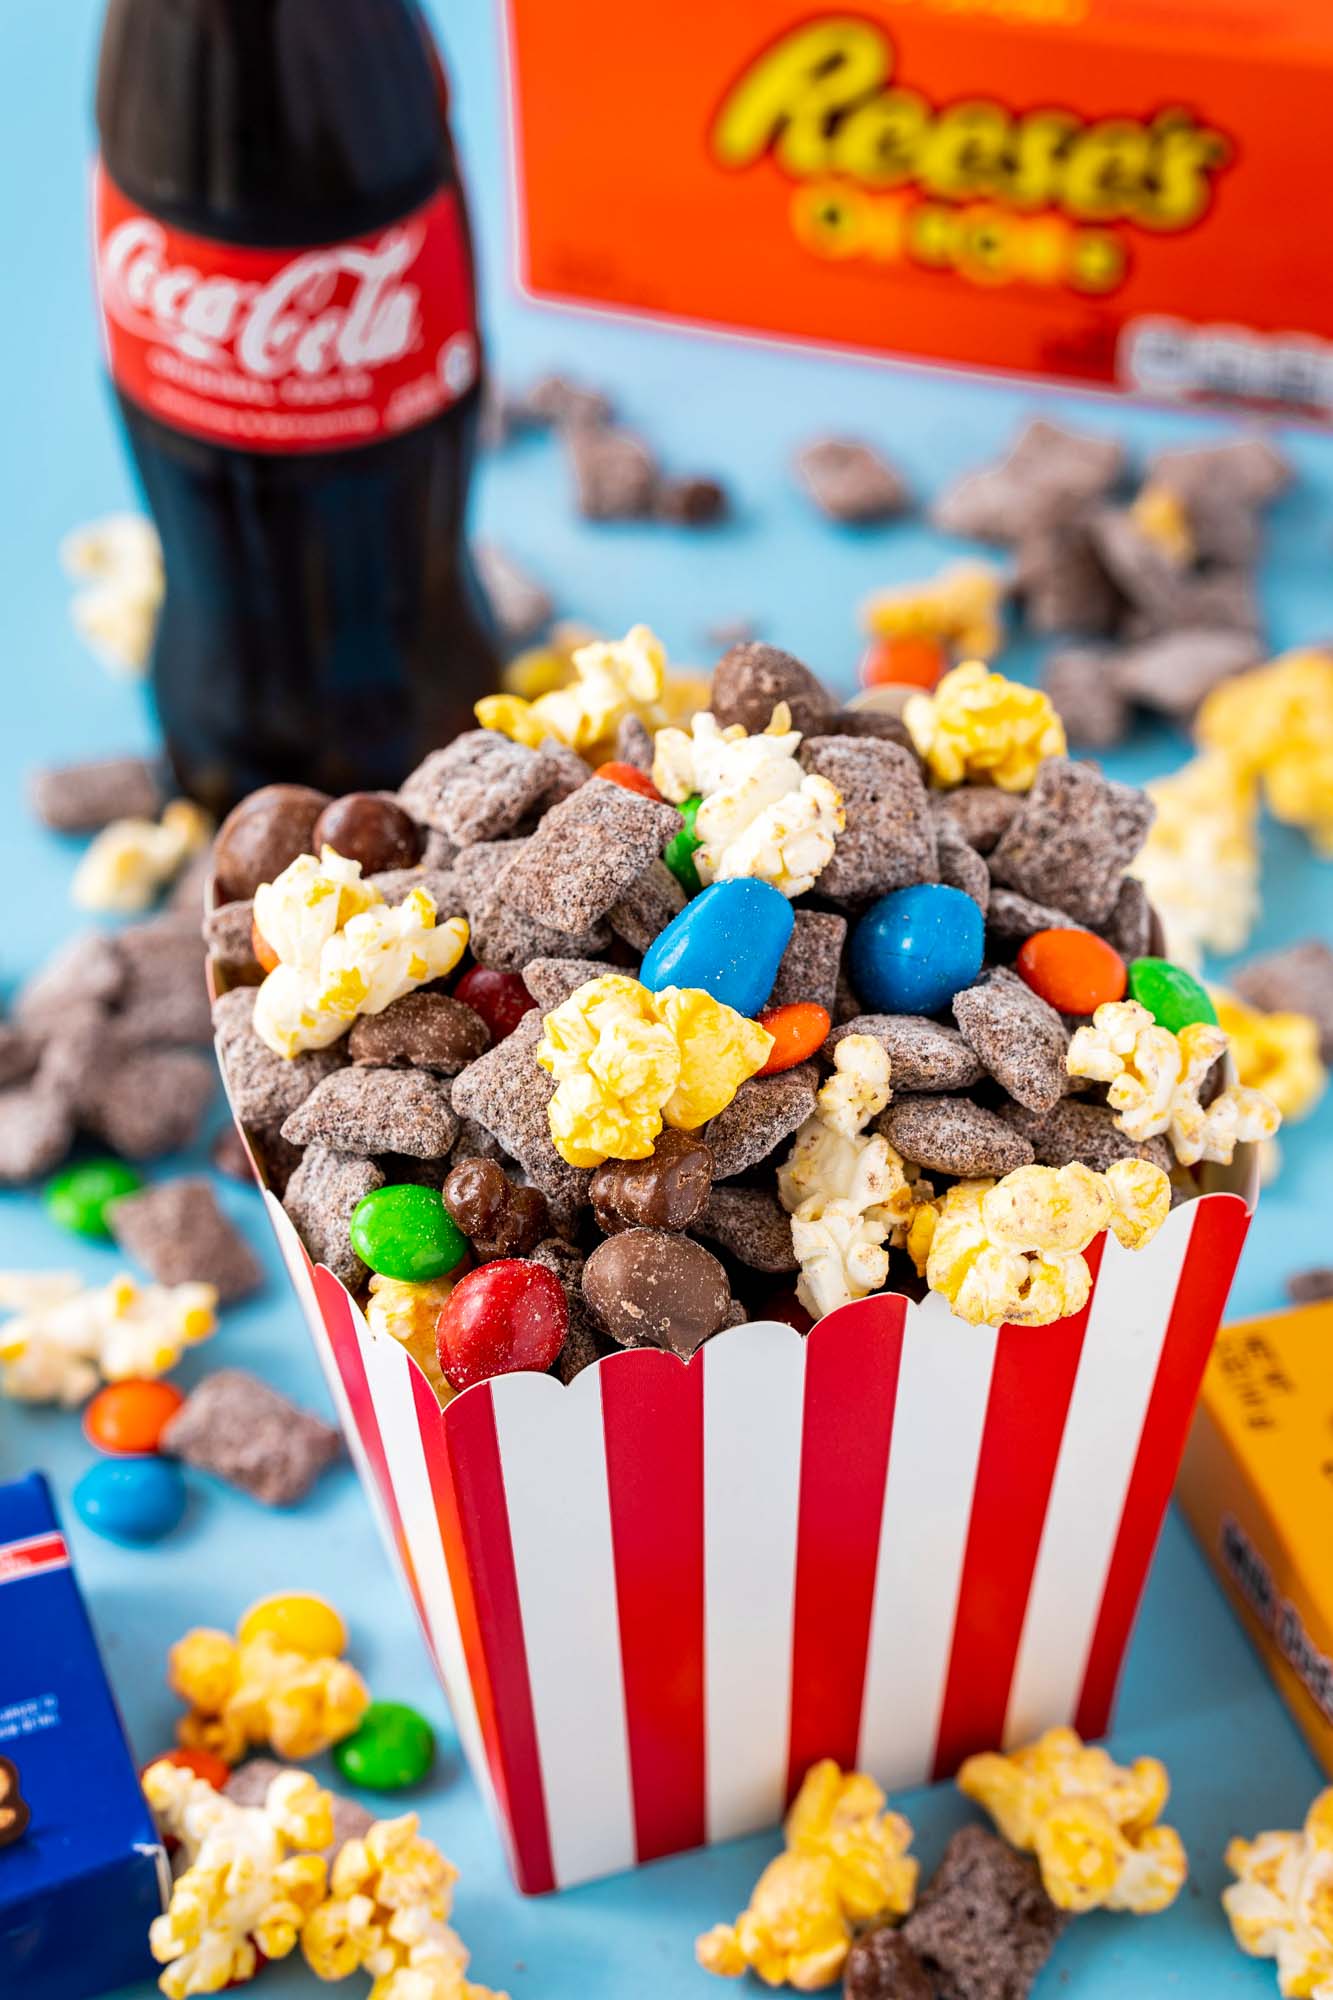 a small red and white striped popcorn box filled with move theatre muddy buddy snack mix. A coca cola bottle is in the background along with a box of reeses pieces